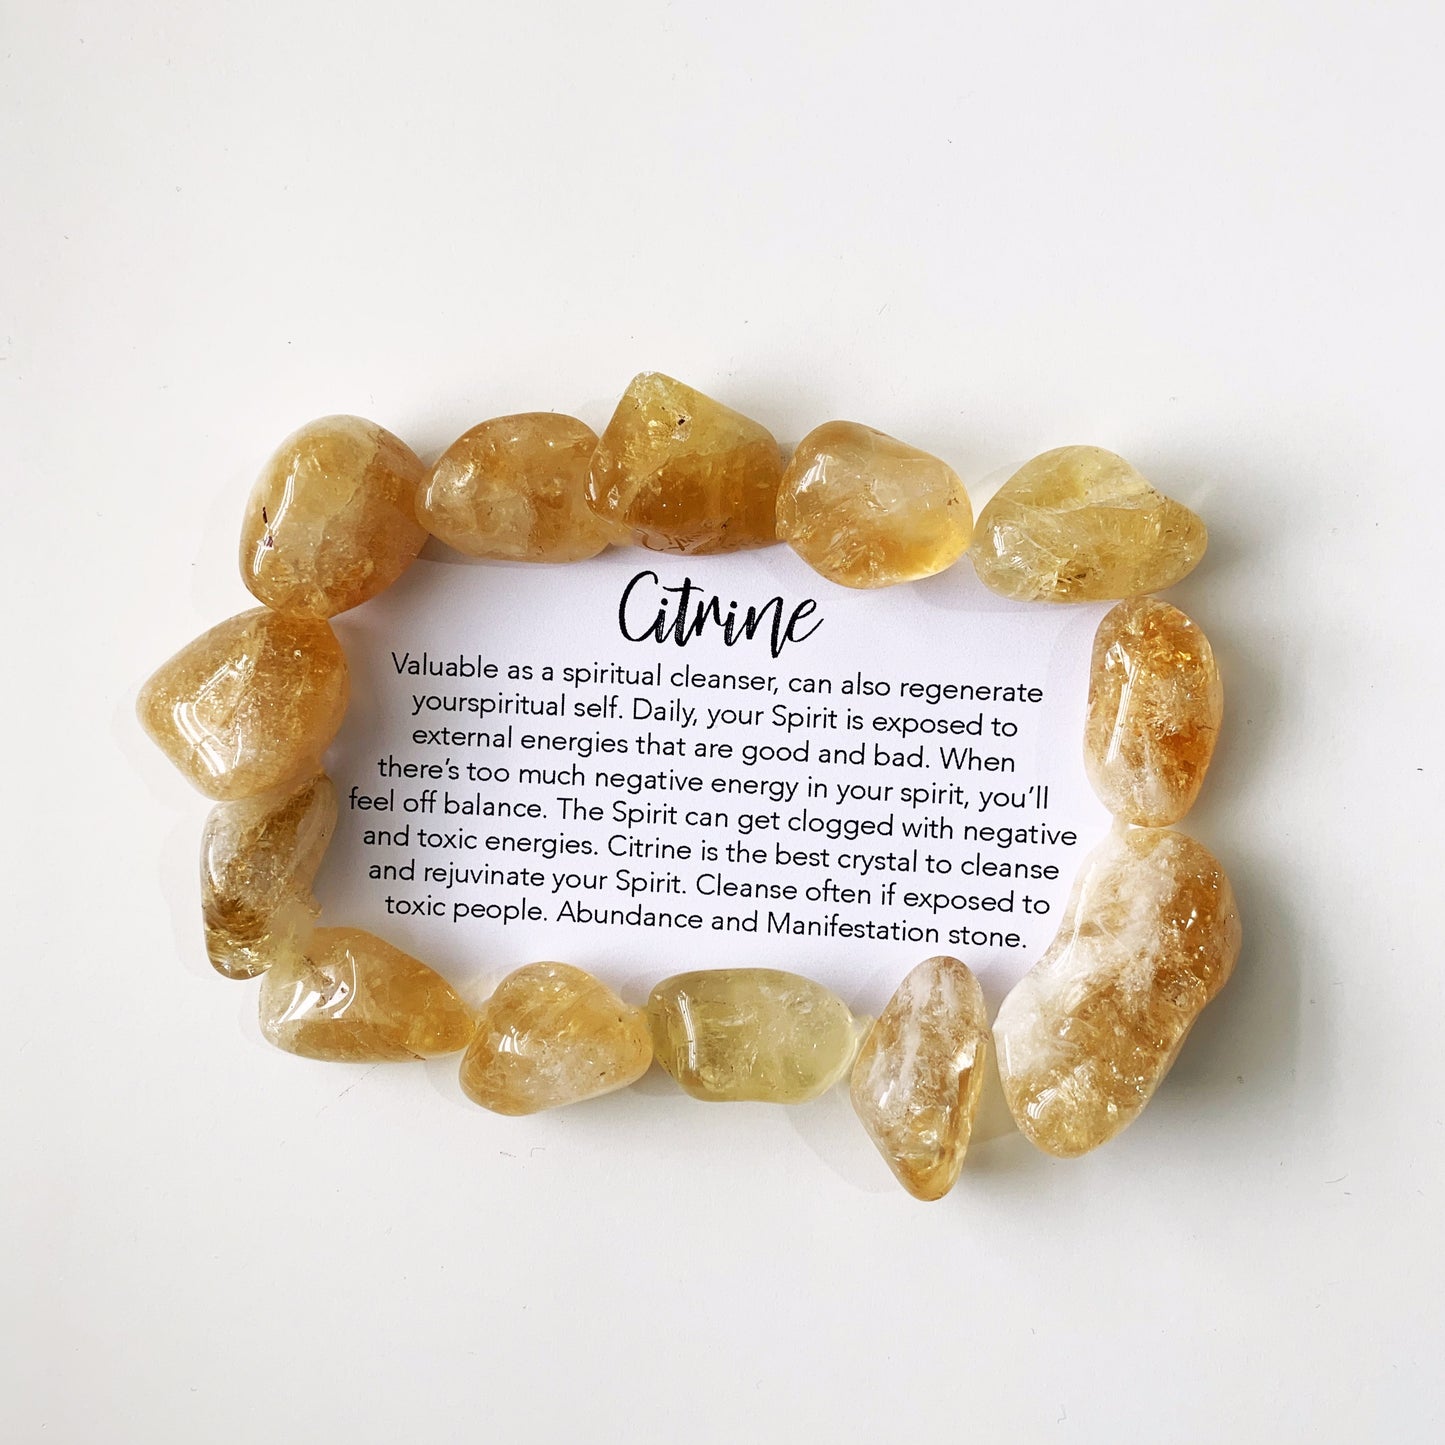 Citrine is a premier stone of manifestation, imagination, and personal will. Carrying the power of the sun, it is warm and comforting, energizing and life giving. It stimulates the chakras like the sunlight of spring, clearing the mind and stirring the soul to action.  Listing 1 Stone